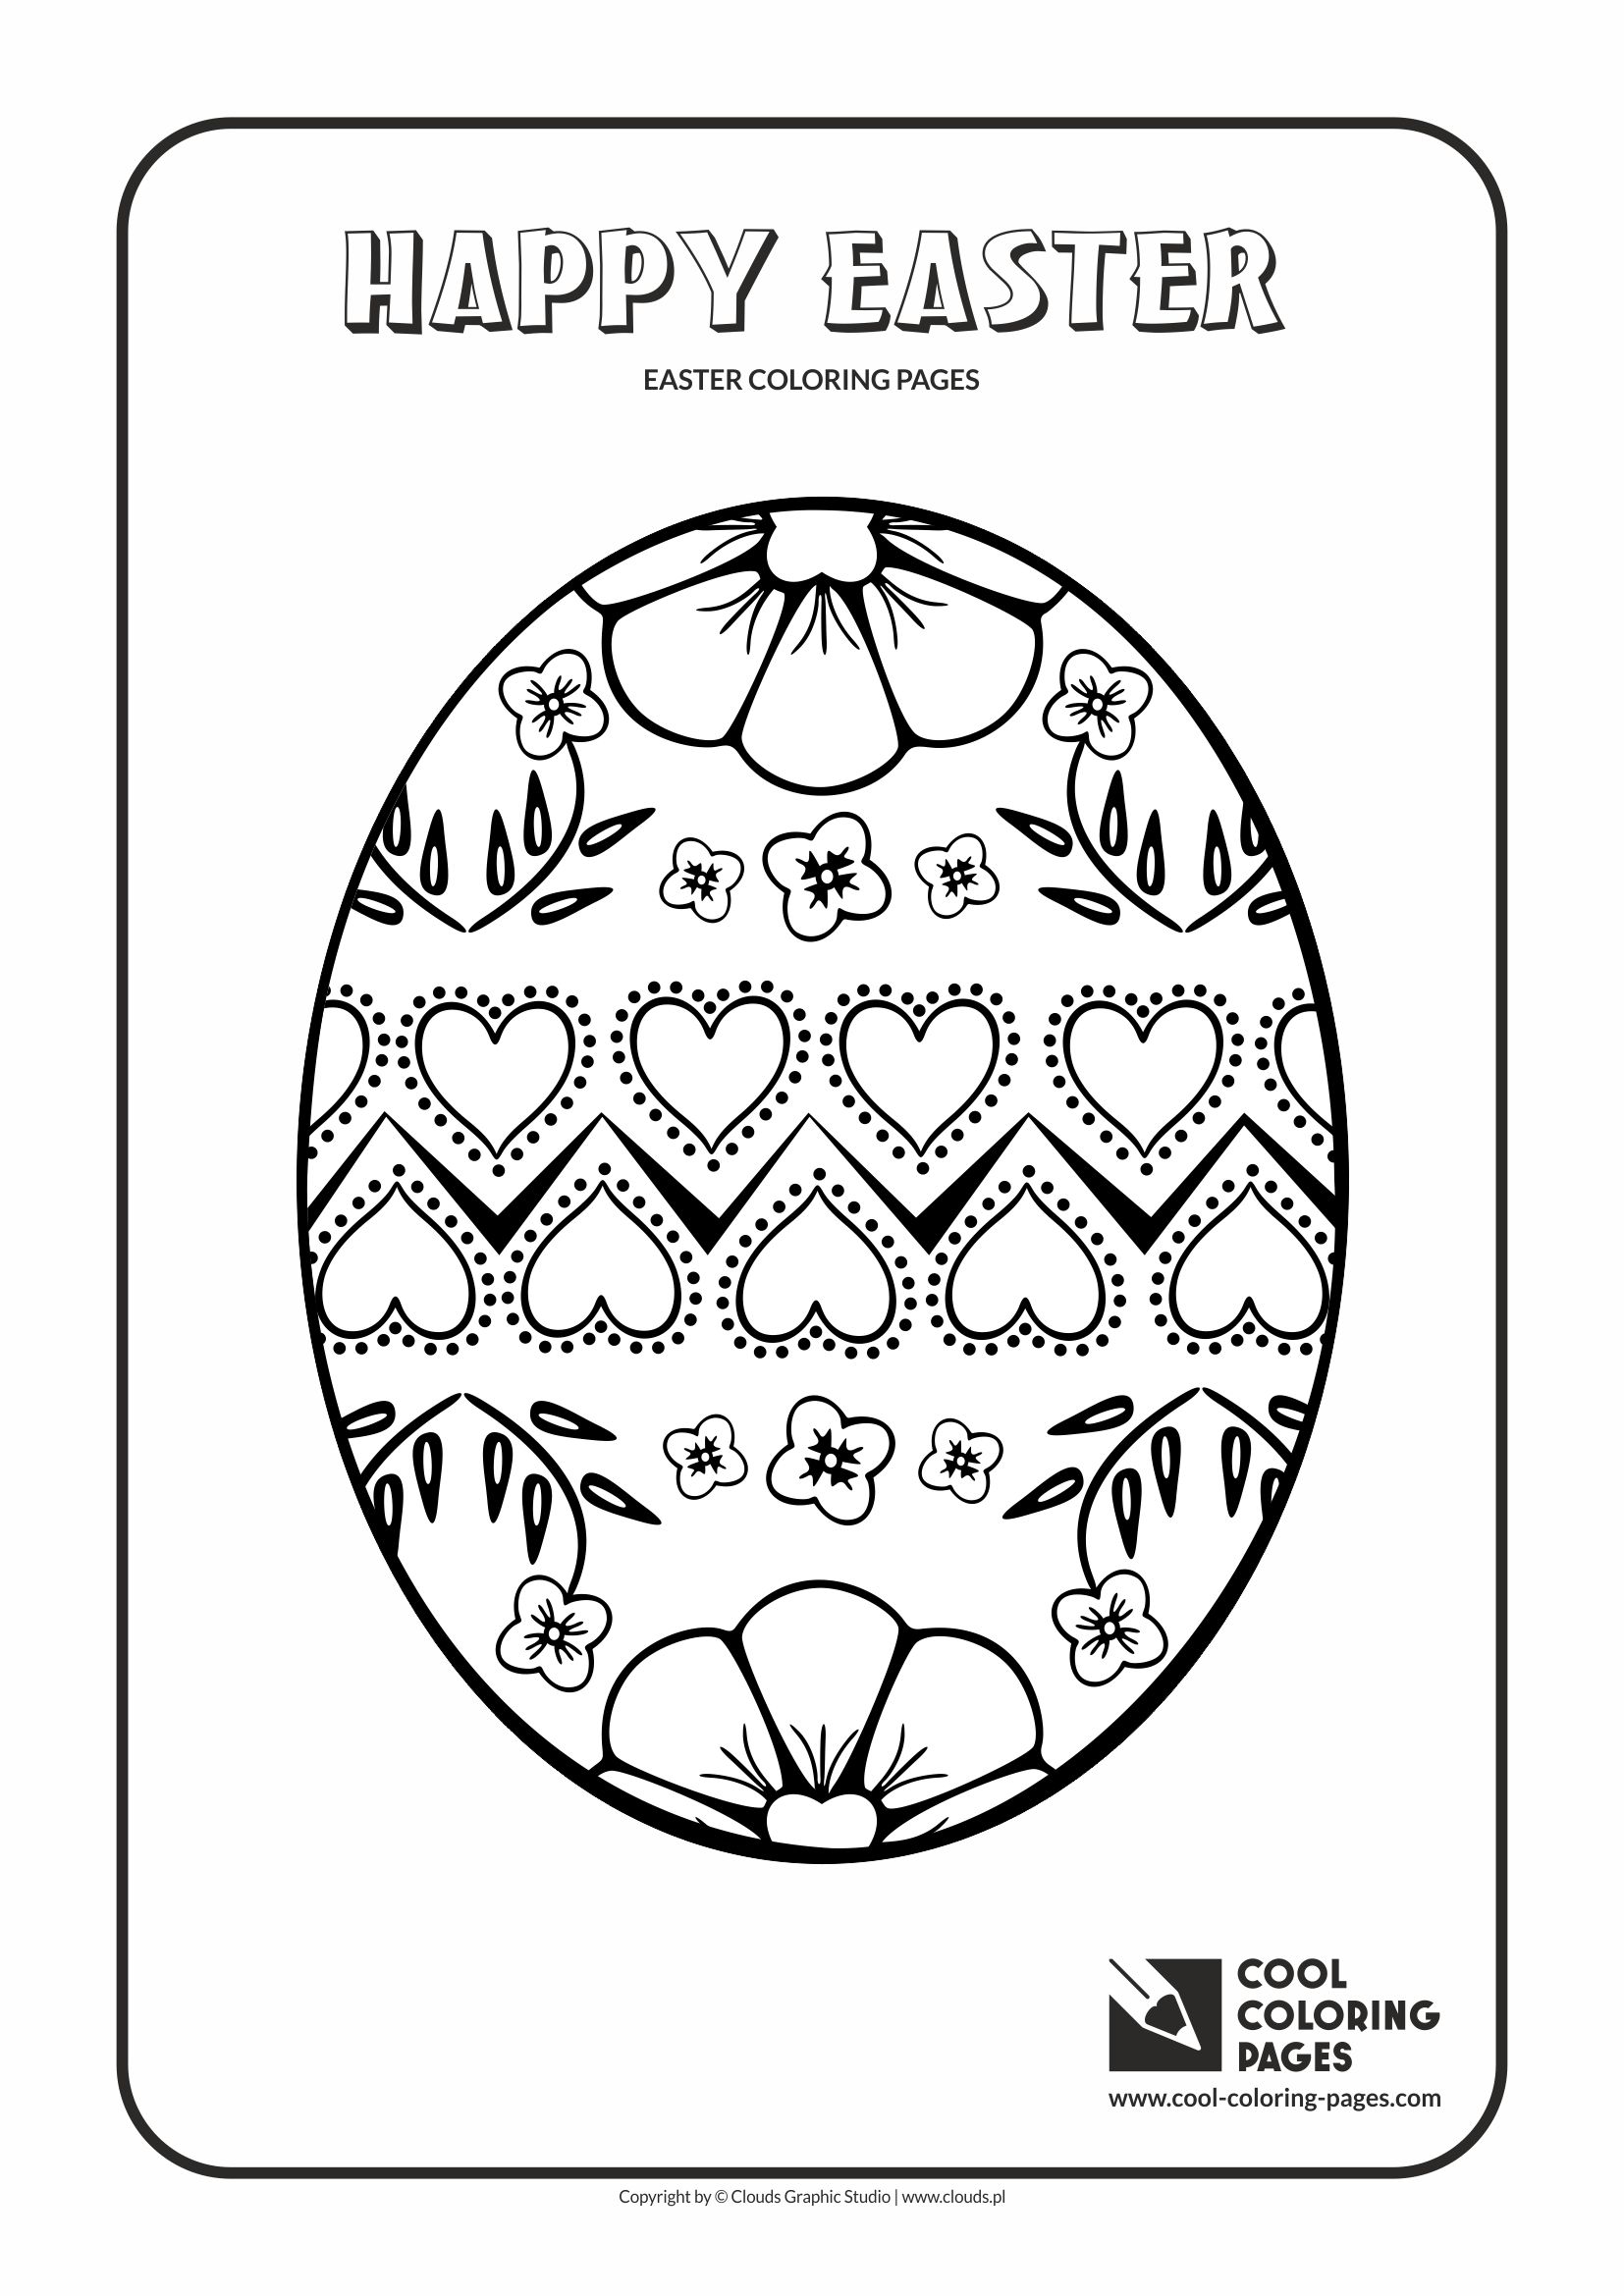 Cool Coloring Pages Easter egg no 4 coloring page   Cool Coloring Pages ...